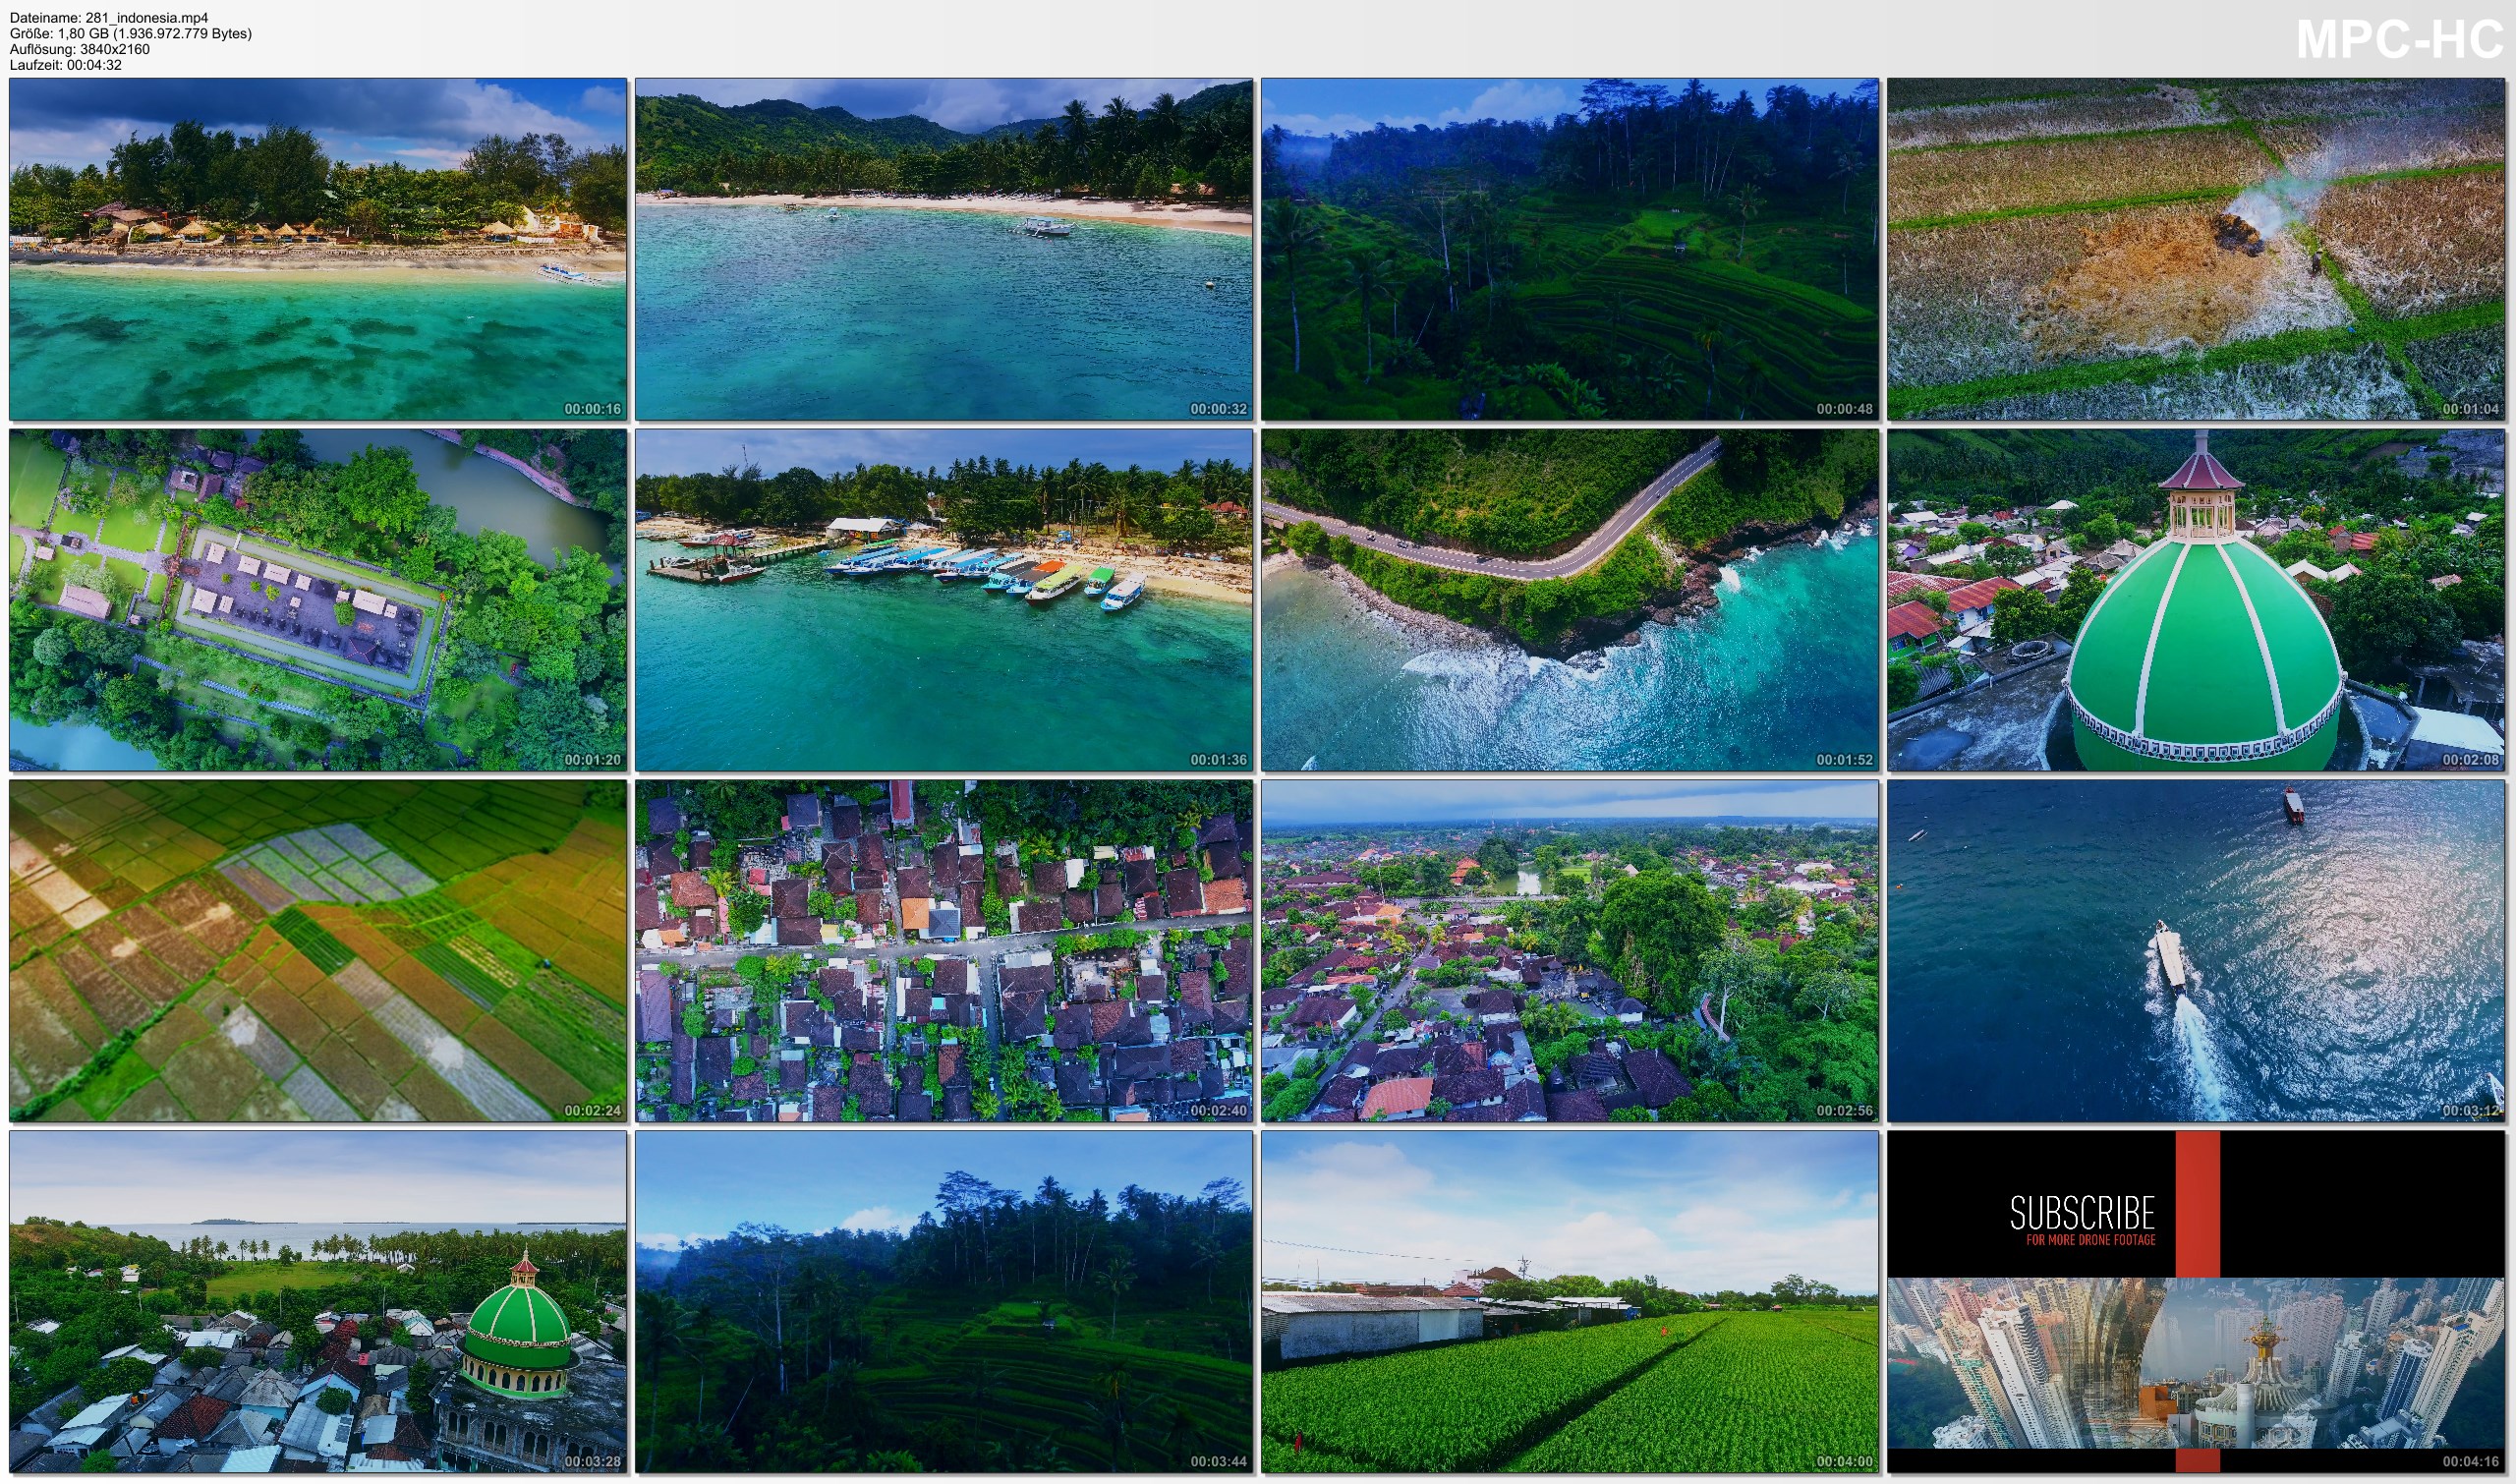 Drone Pictures from Video 【4K】Drone Footage | Wonderful Indonesia - Bali, Lombok & More 2019 ..:: Cinematic Aerial Film